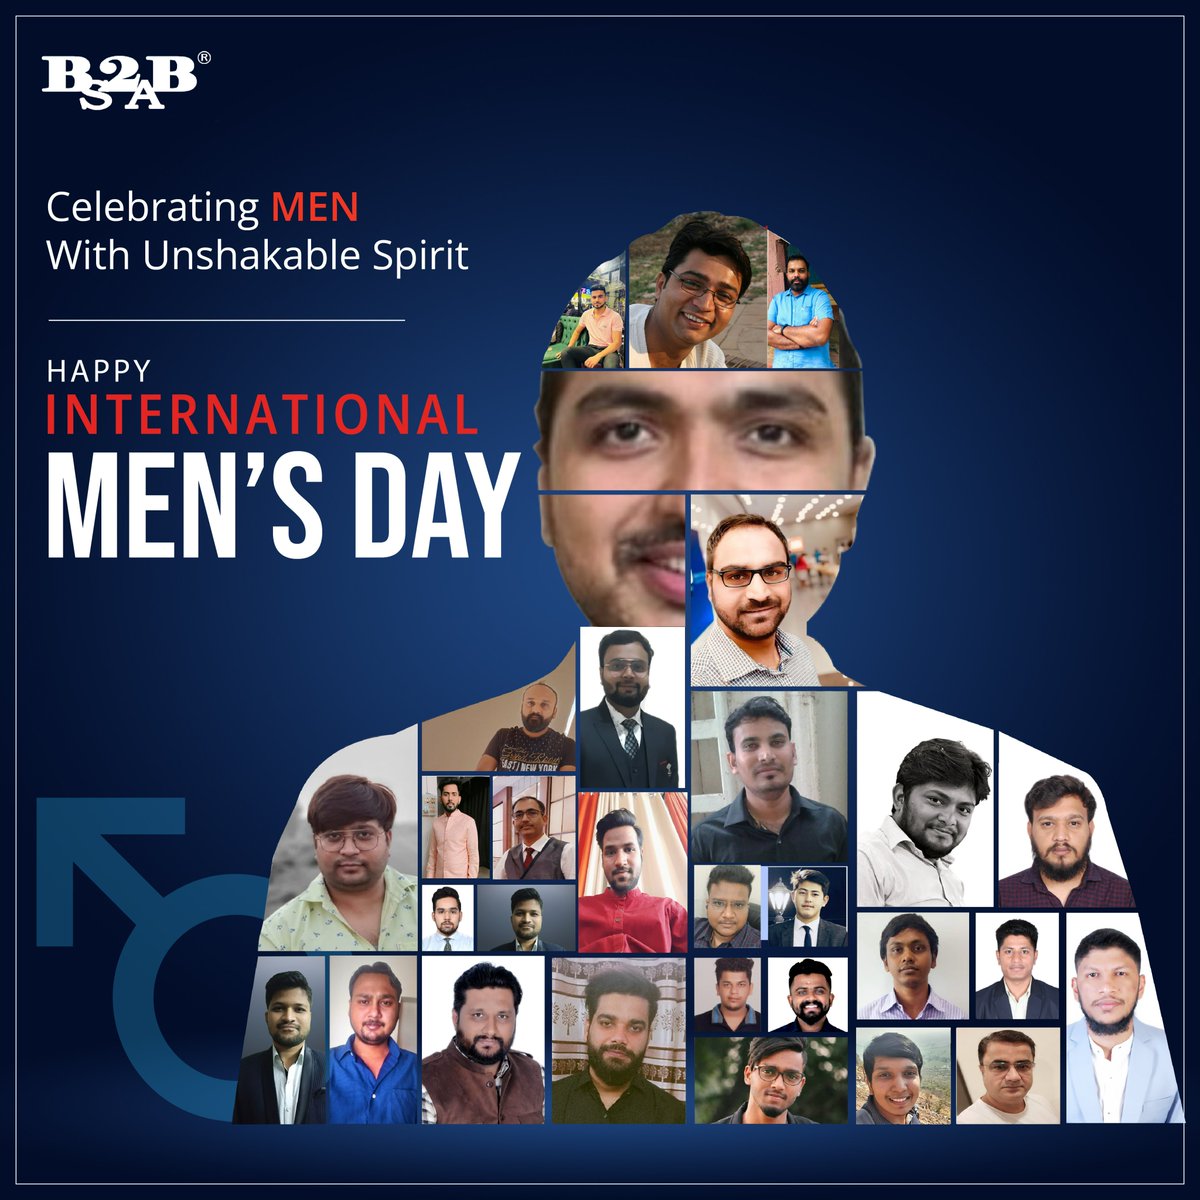 Team #B2BSalesArrow gives a huge #shoutout to the men with an #unwavering spirit, strength in their character upholding the #corevalues, and a humble demeanour that contributes to bringing positive value to the world.

Happy #InternationalMensDay!